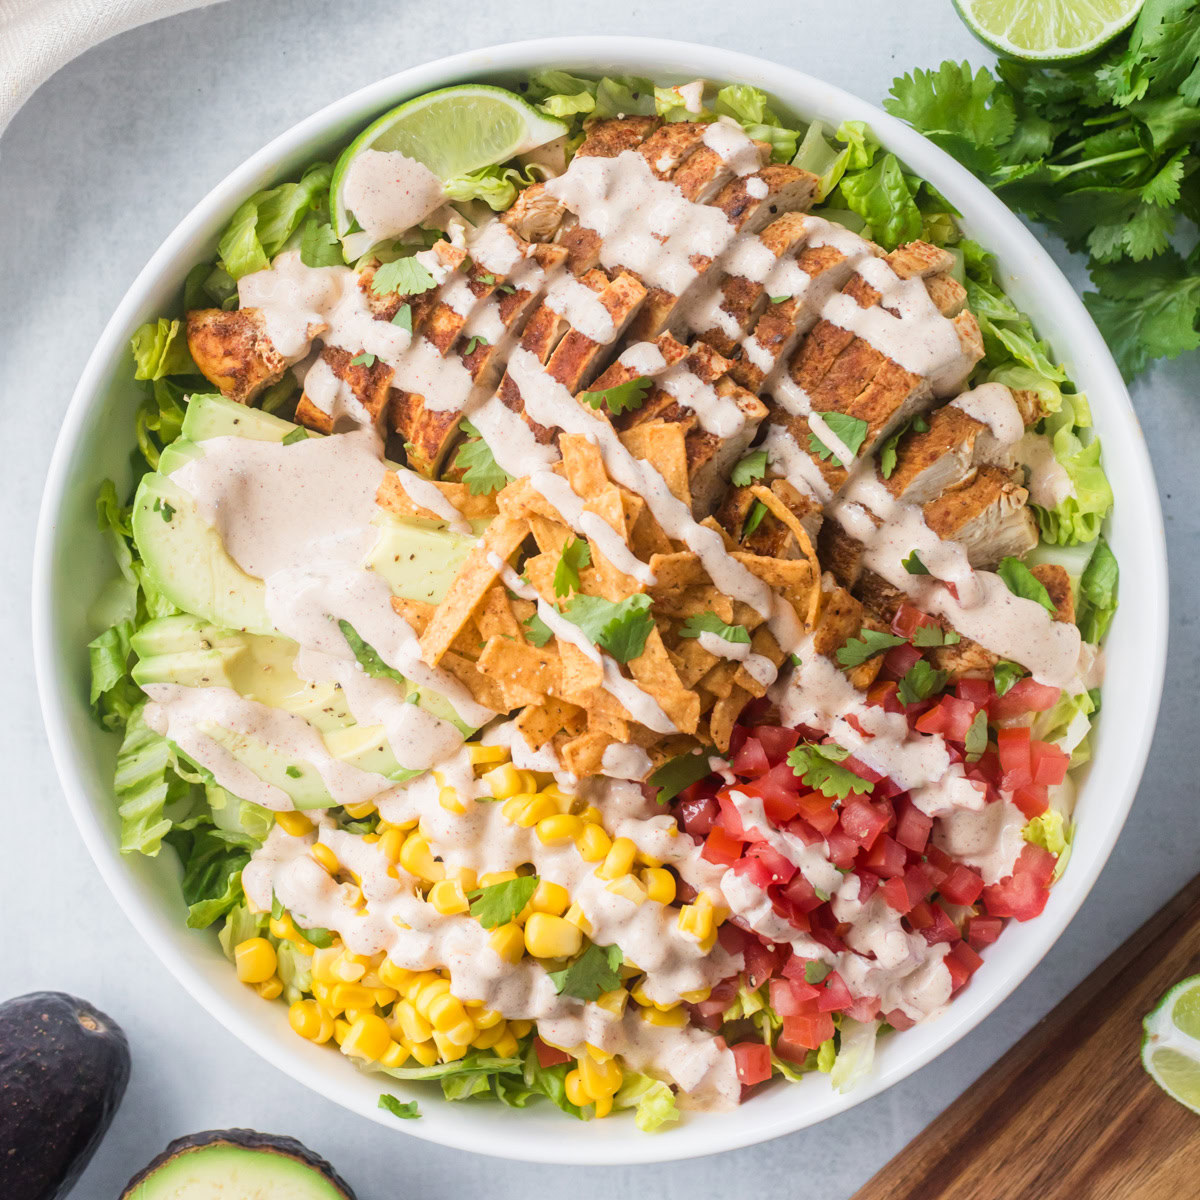 Santa fe salad with chicken and dressing.